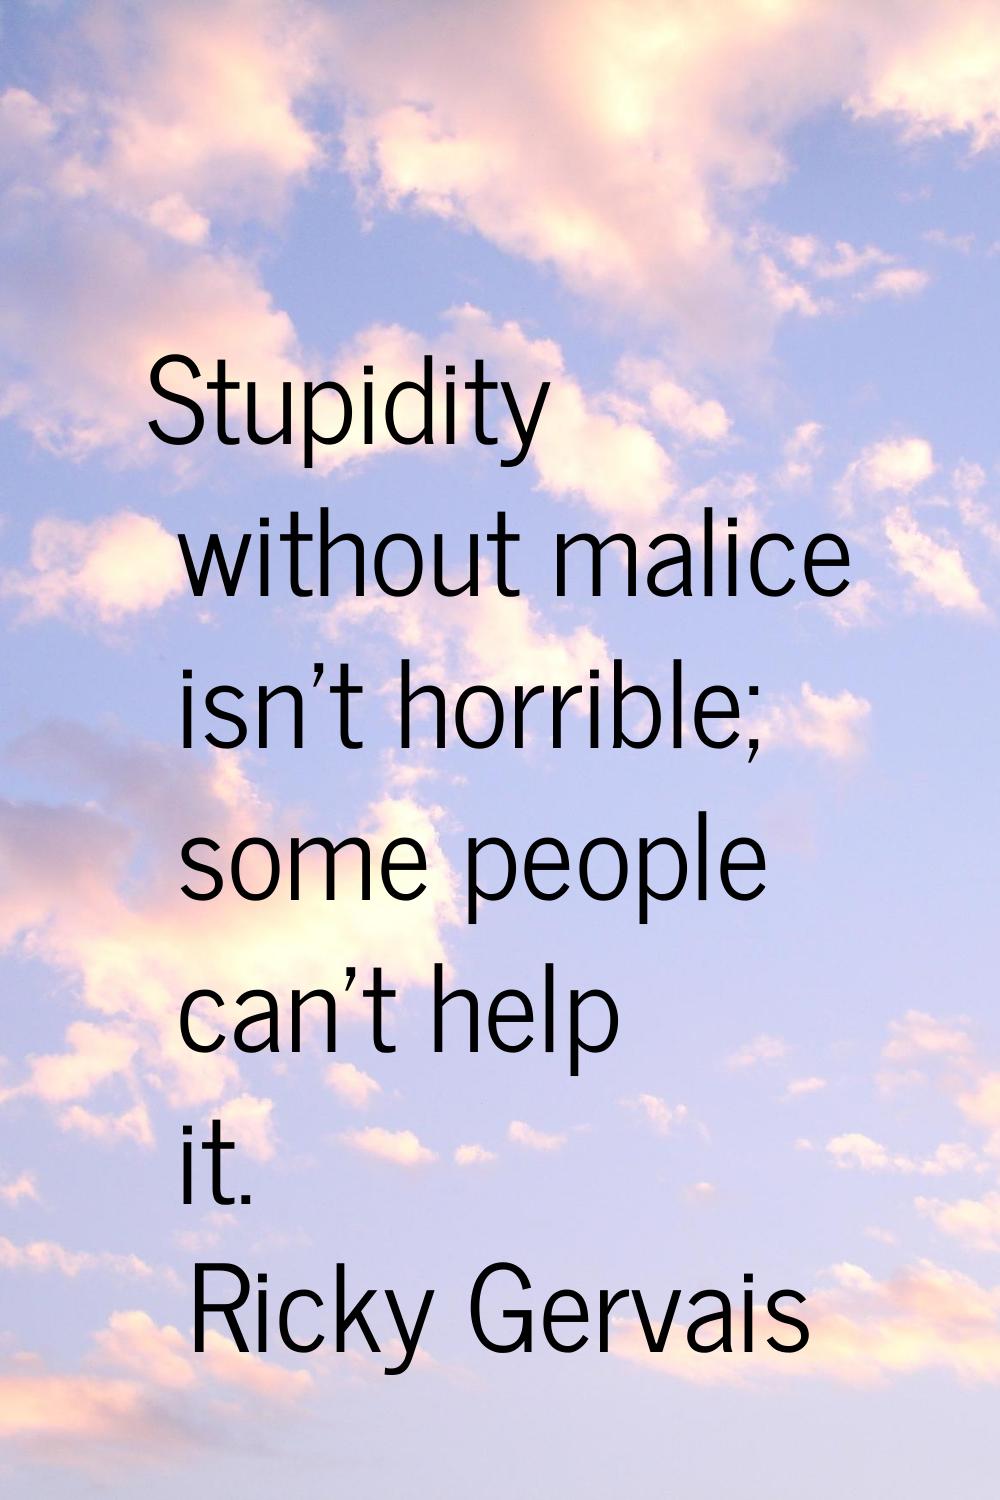 Stupidity without malice isn't horrible; some people can't help it.